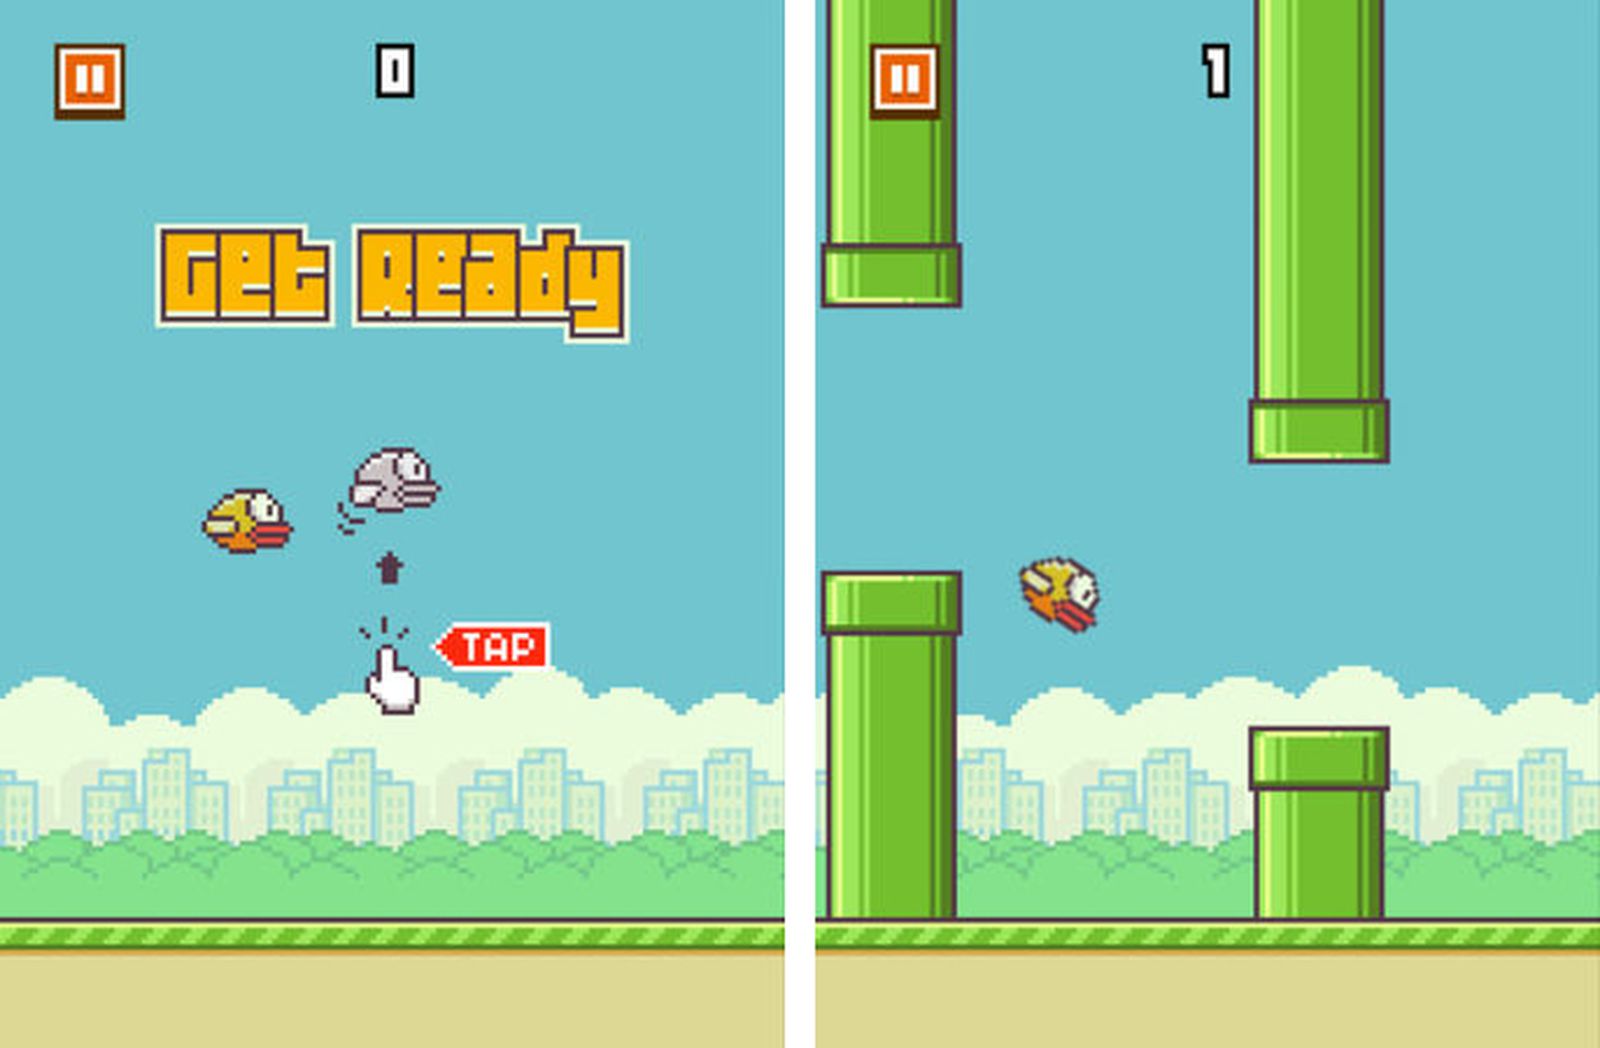 Flappy Bird no longer available for download